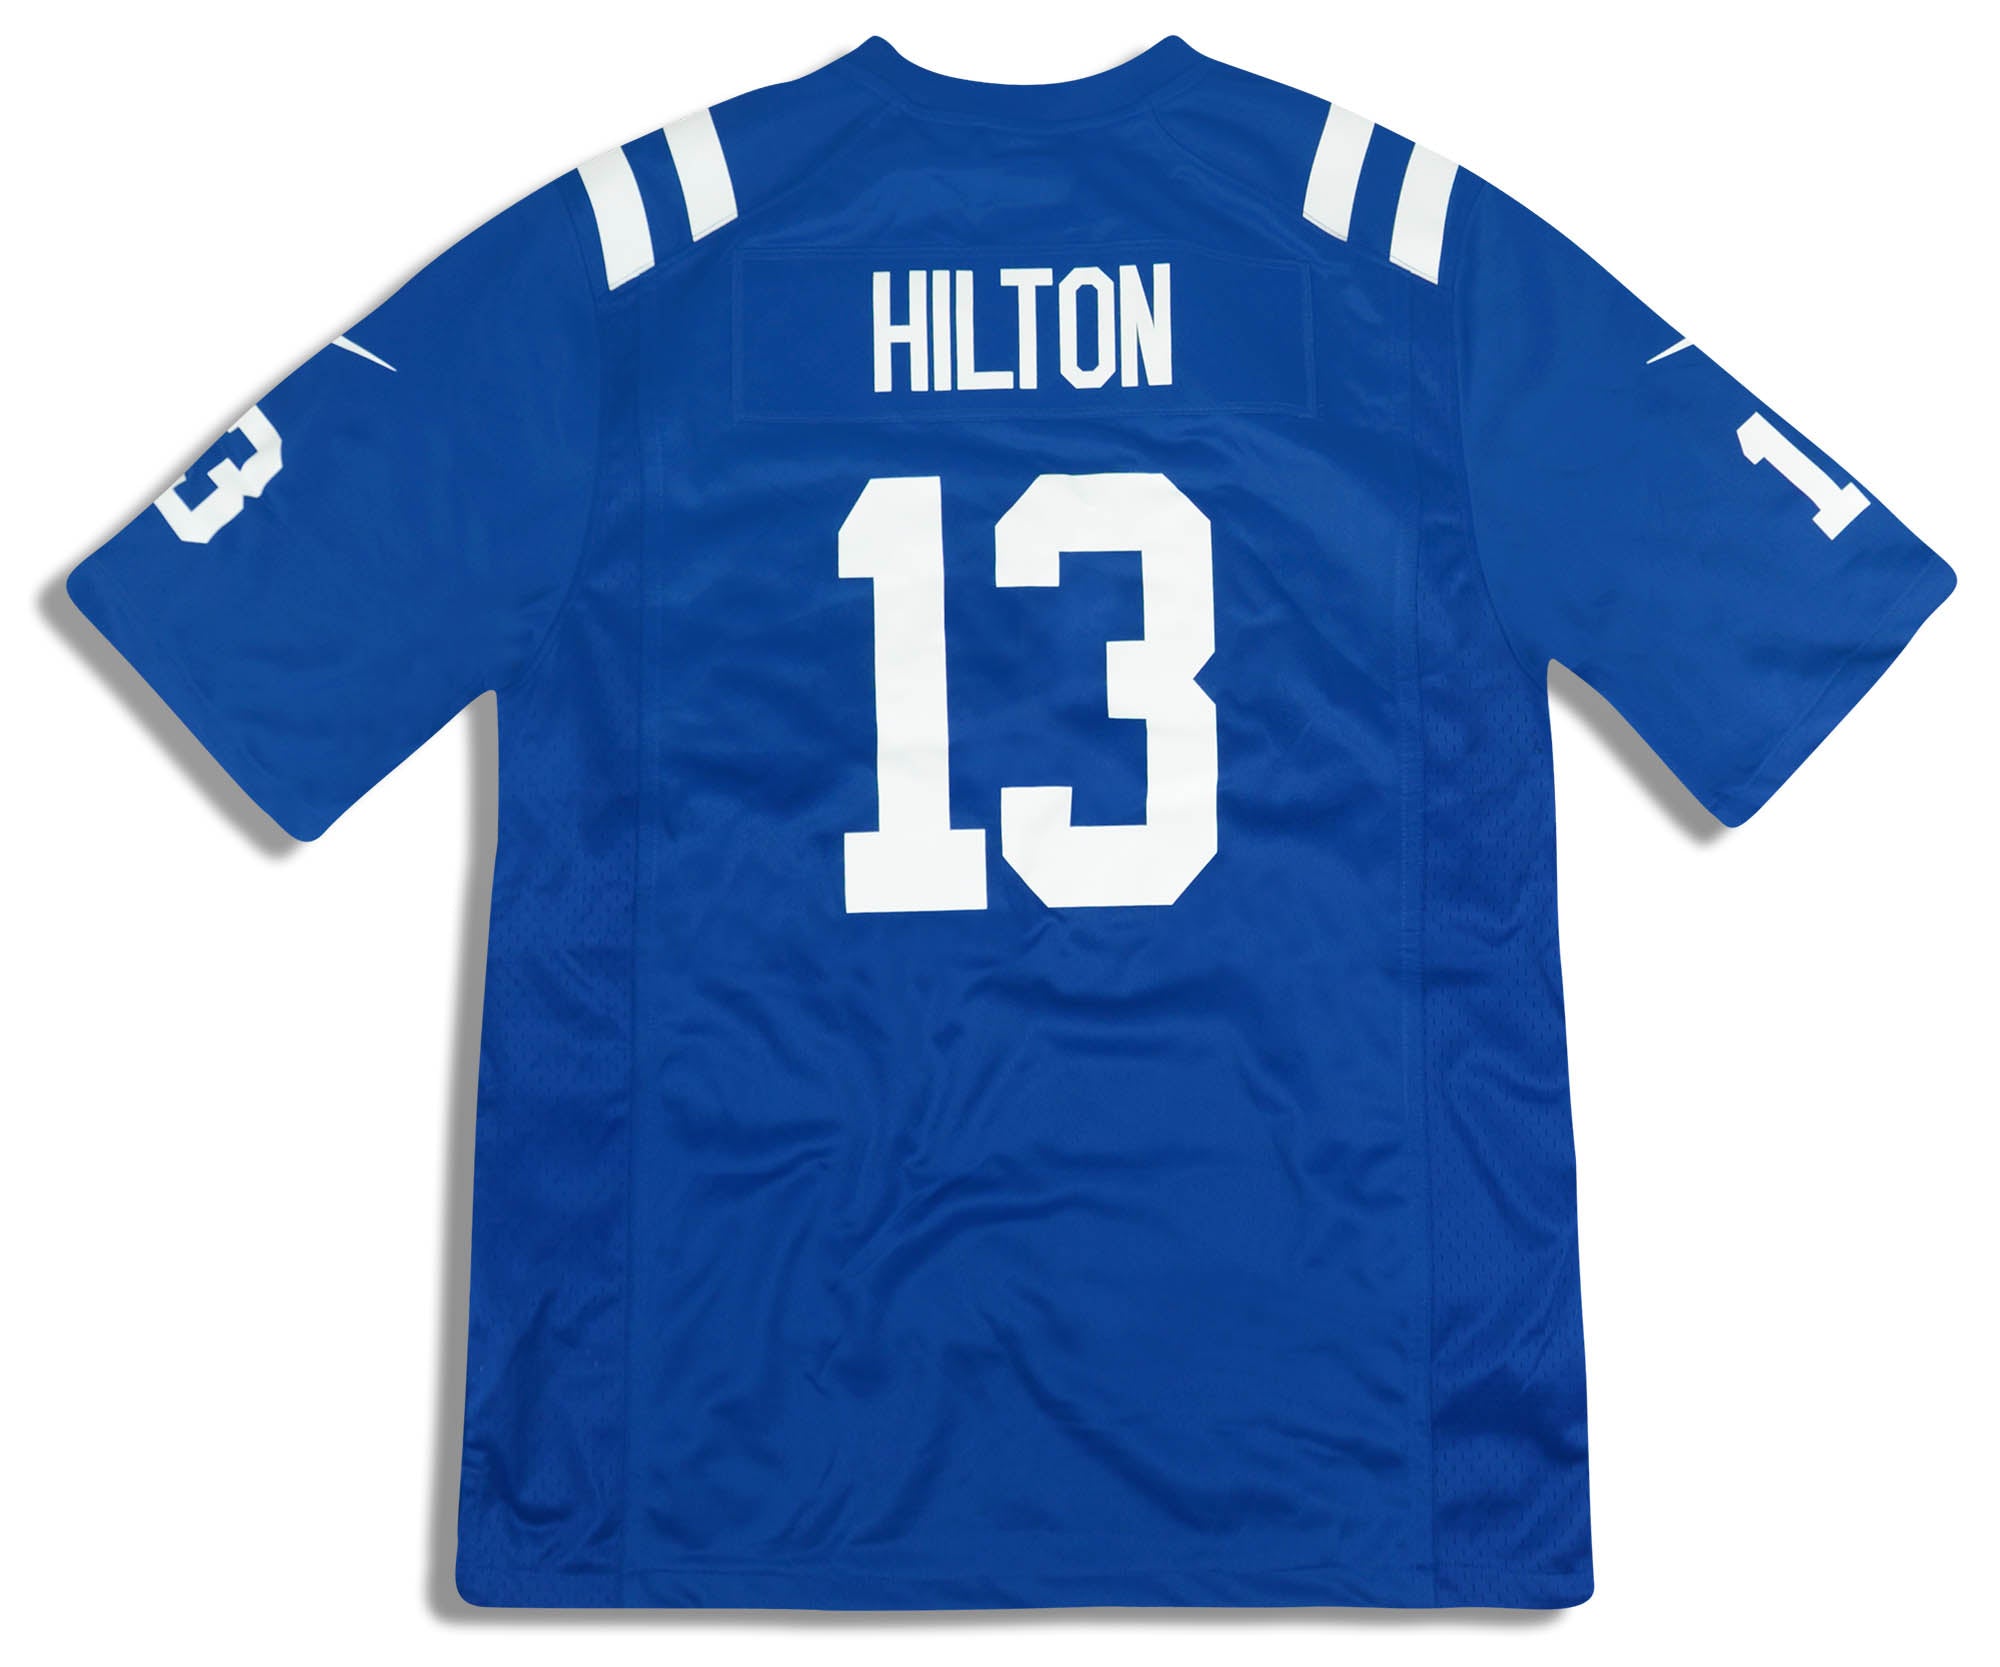 2018 INDIANAPOLIS COLTS HILTON #13 NIKE GAME JERSEY (HOME) L - W/TAGS